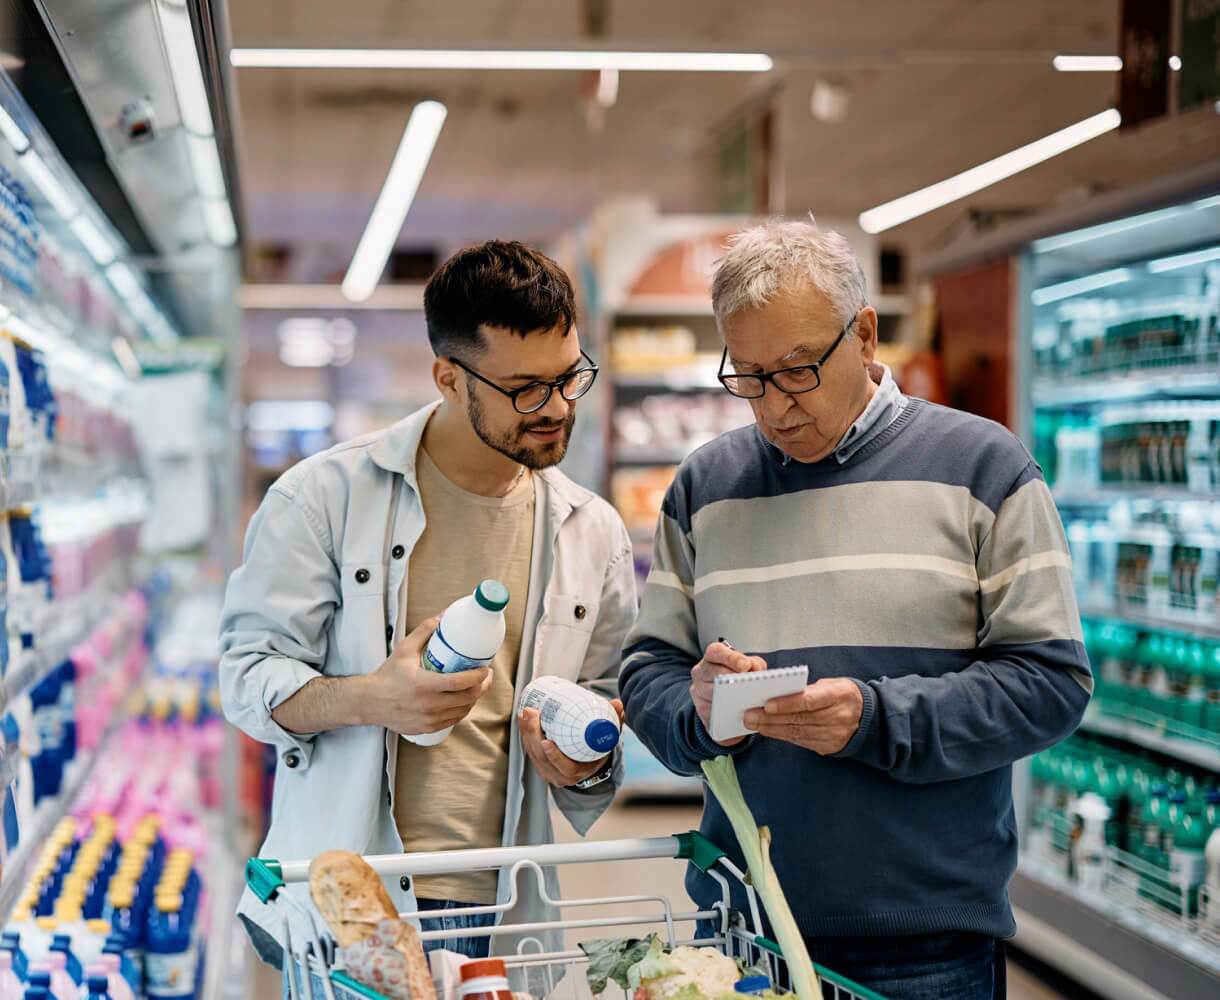 An older and younger man comparing products in a grocery store aisle, with the younger man holding a bottle and the older man consulting a list.